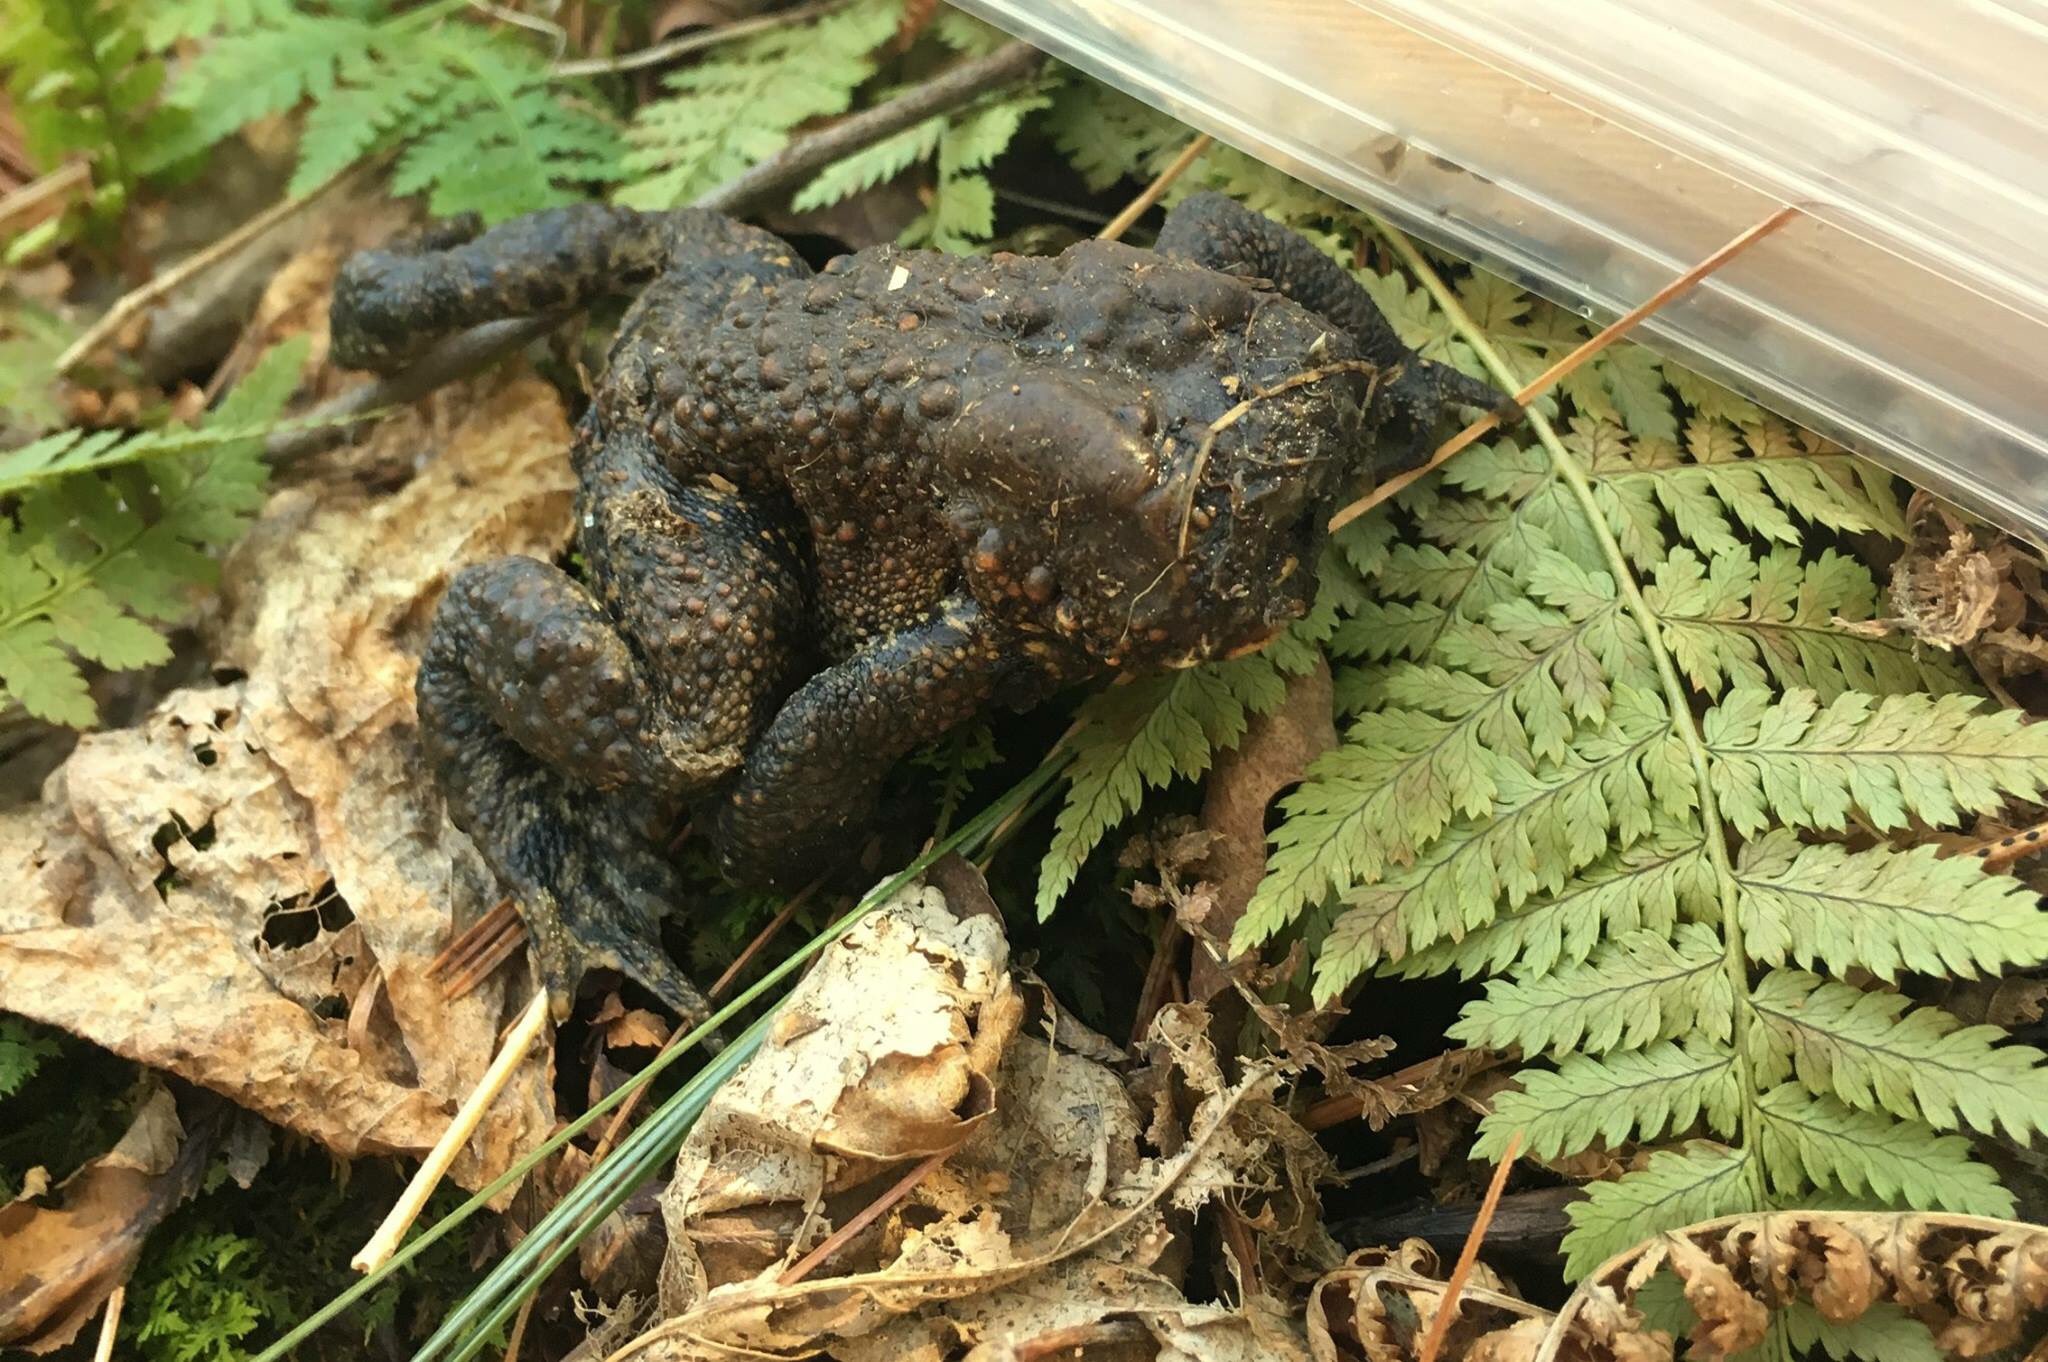 A toad with no face 